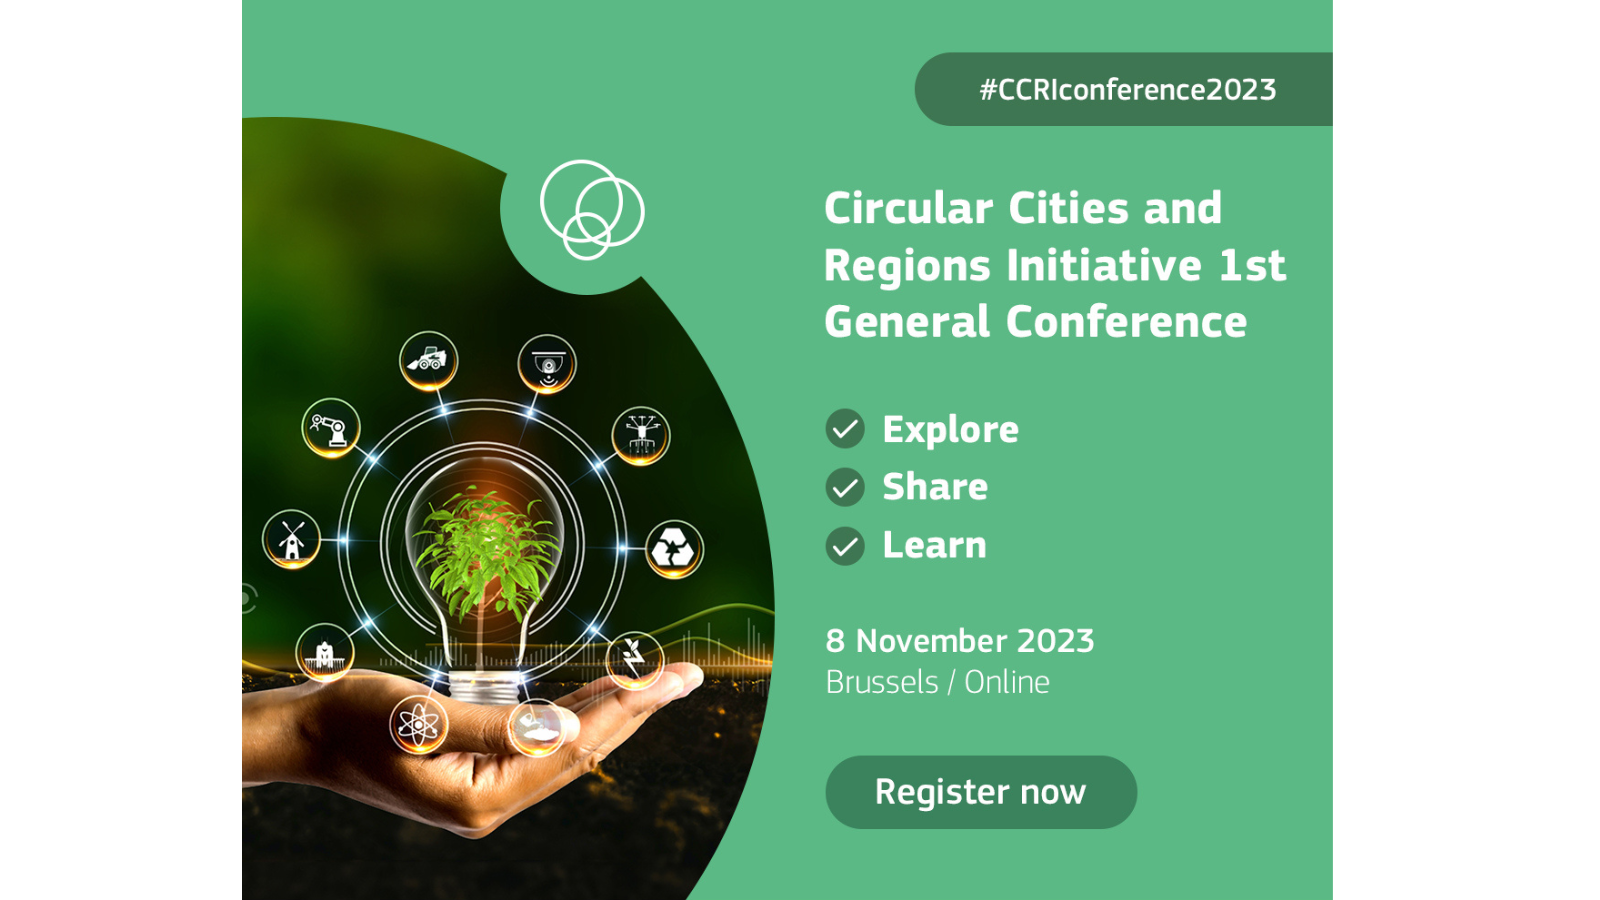 From vision to reality: Cities & regions drive forward Europe’s circular transition